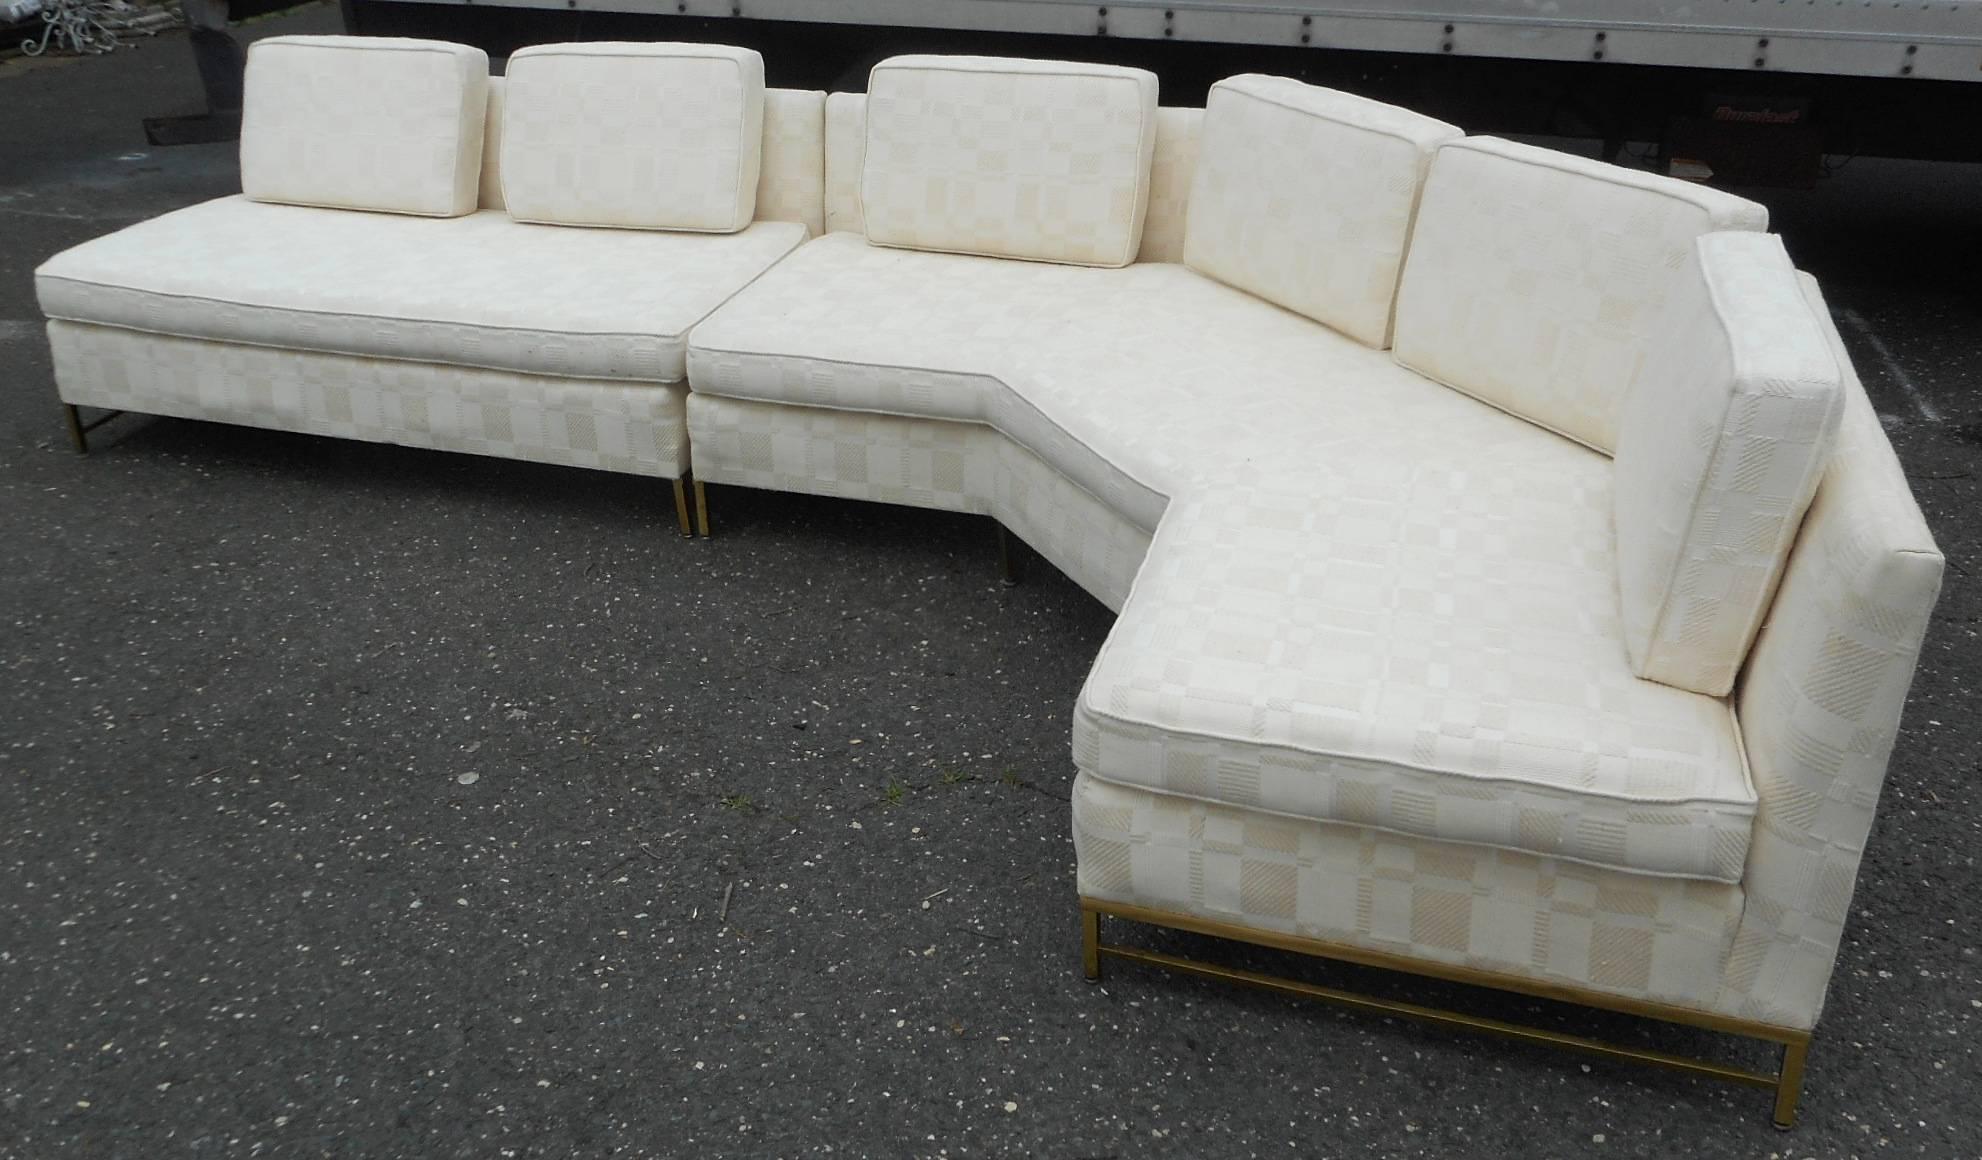 This stunning vintage modern sectional sofa was designed by Paul McCobb for Directional in 1958. Beautiful two-piece design with thick padded cushions and a stylish brass frame. This shapely piece wraps around at the perfect angle ensuring easy